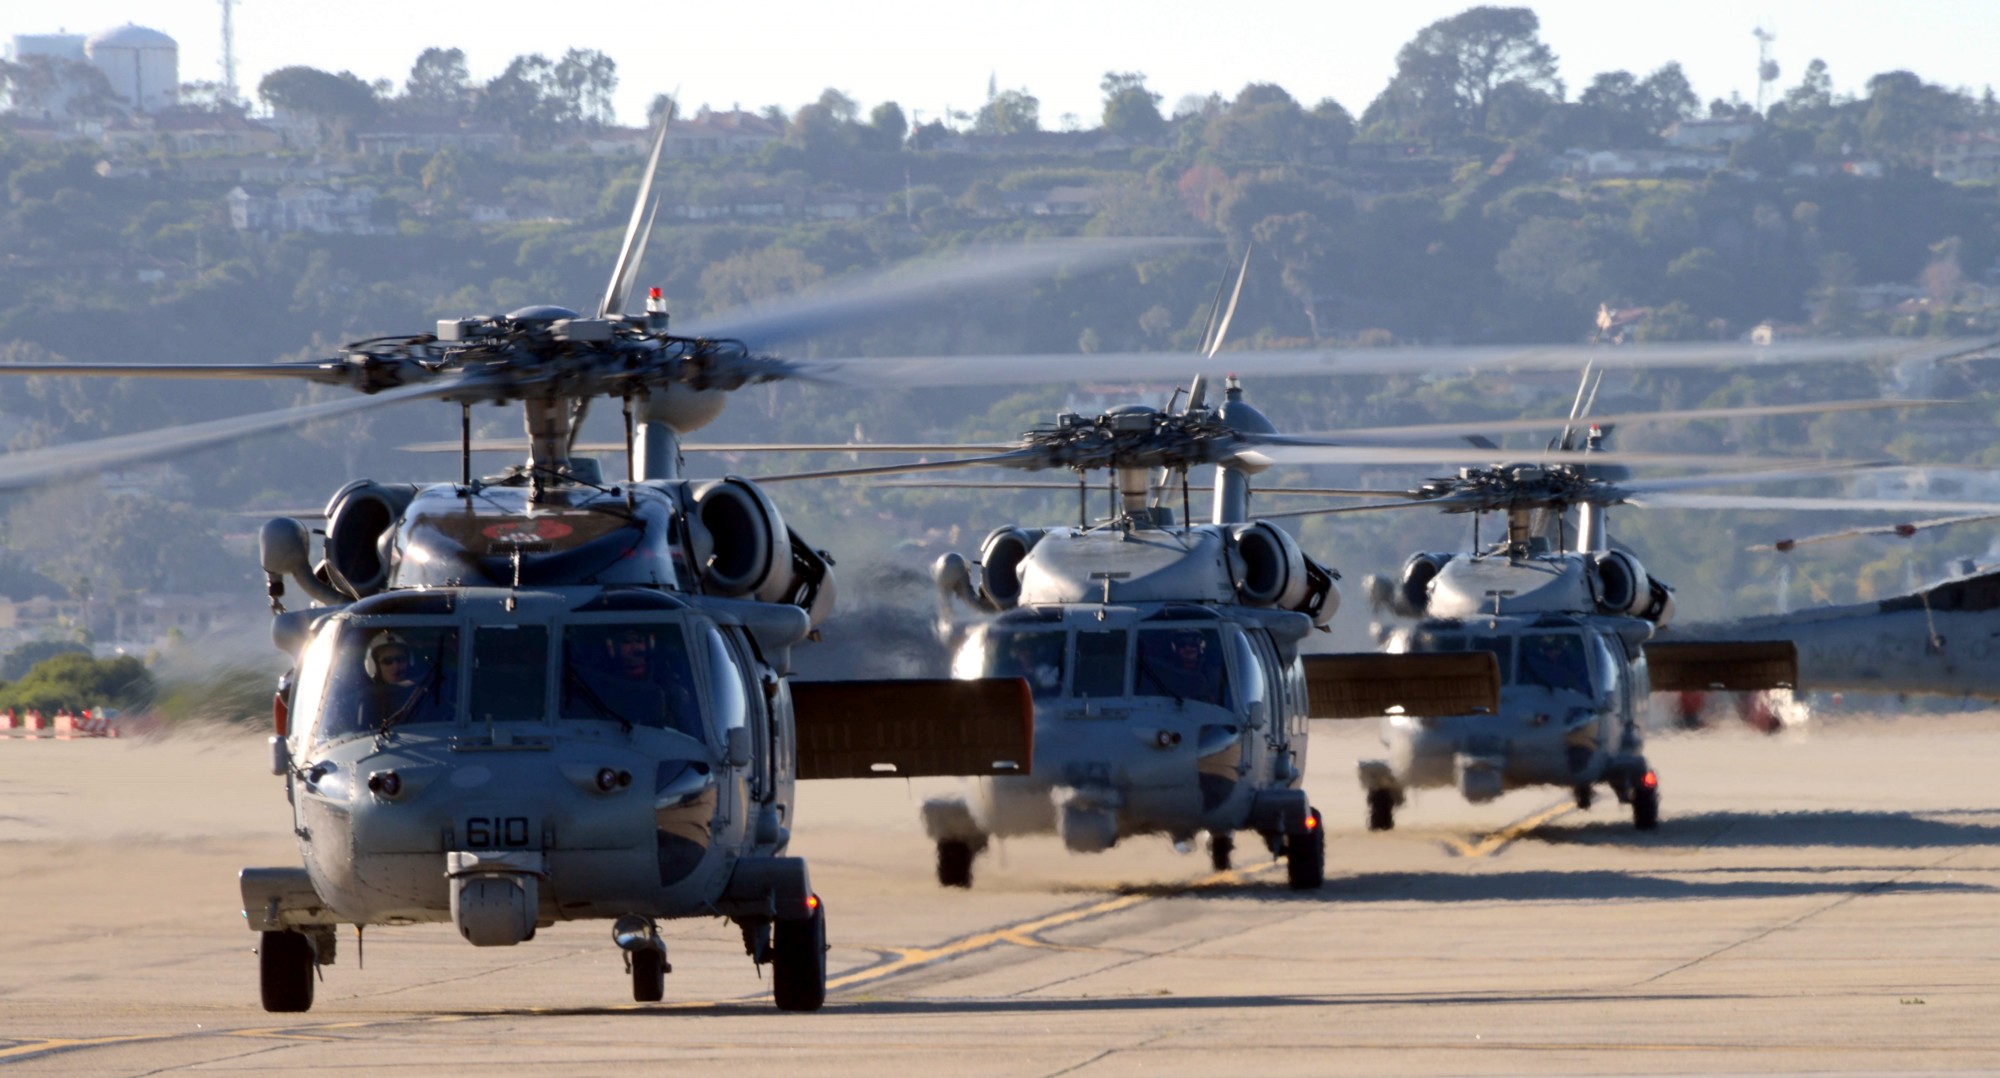 hsc-4 black knights helicopter sea combat squadron us navy mh-60s seahawk 2015 16 nas north island california